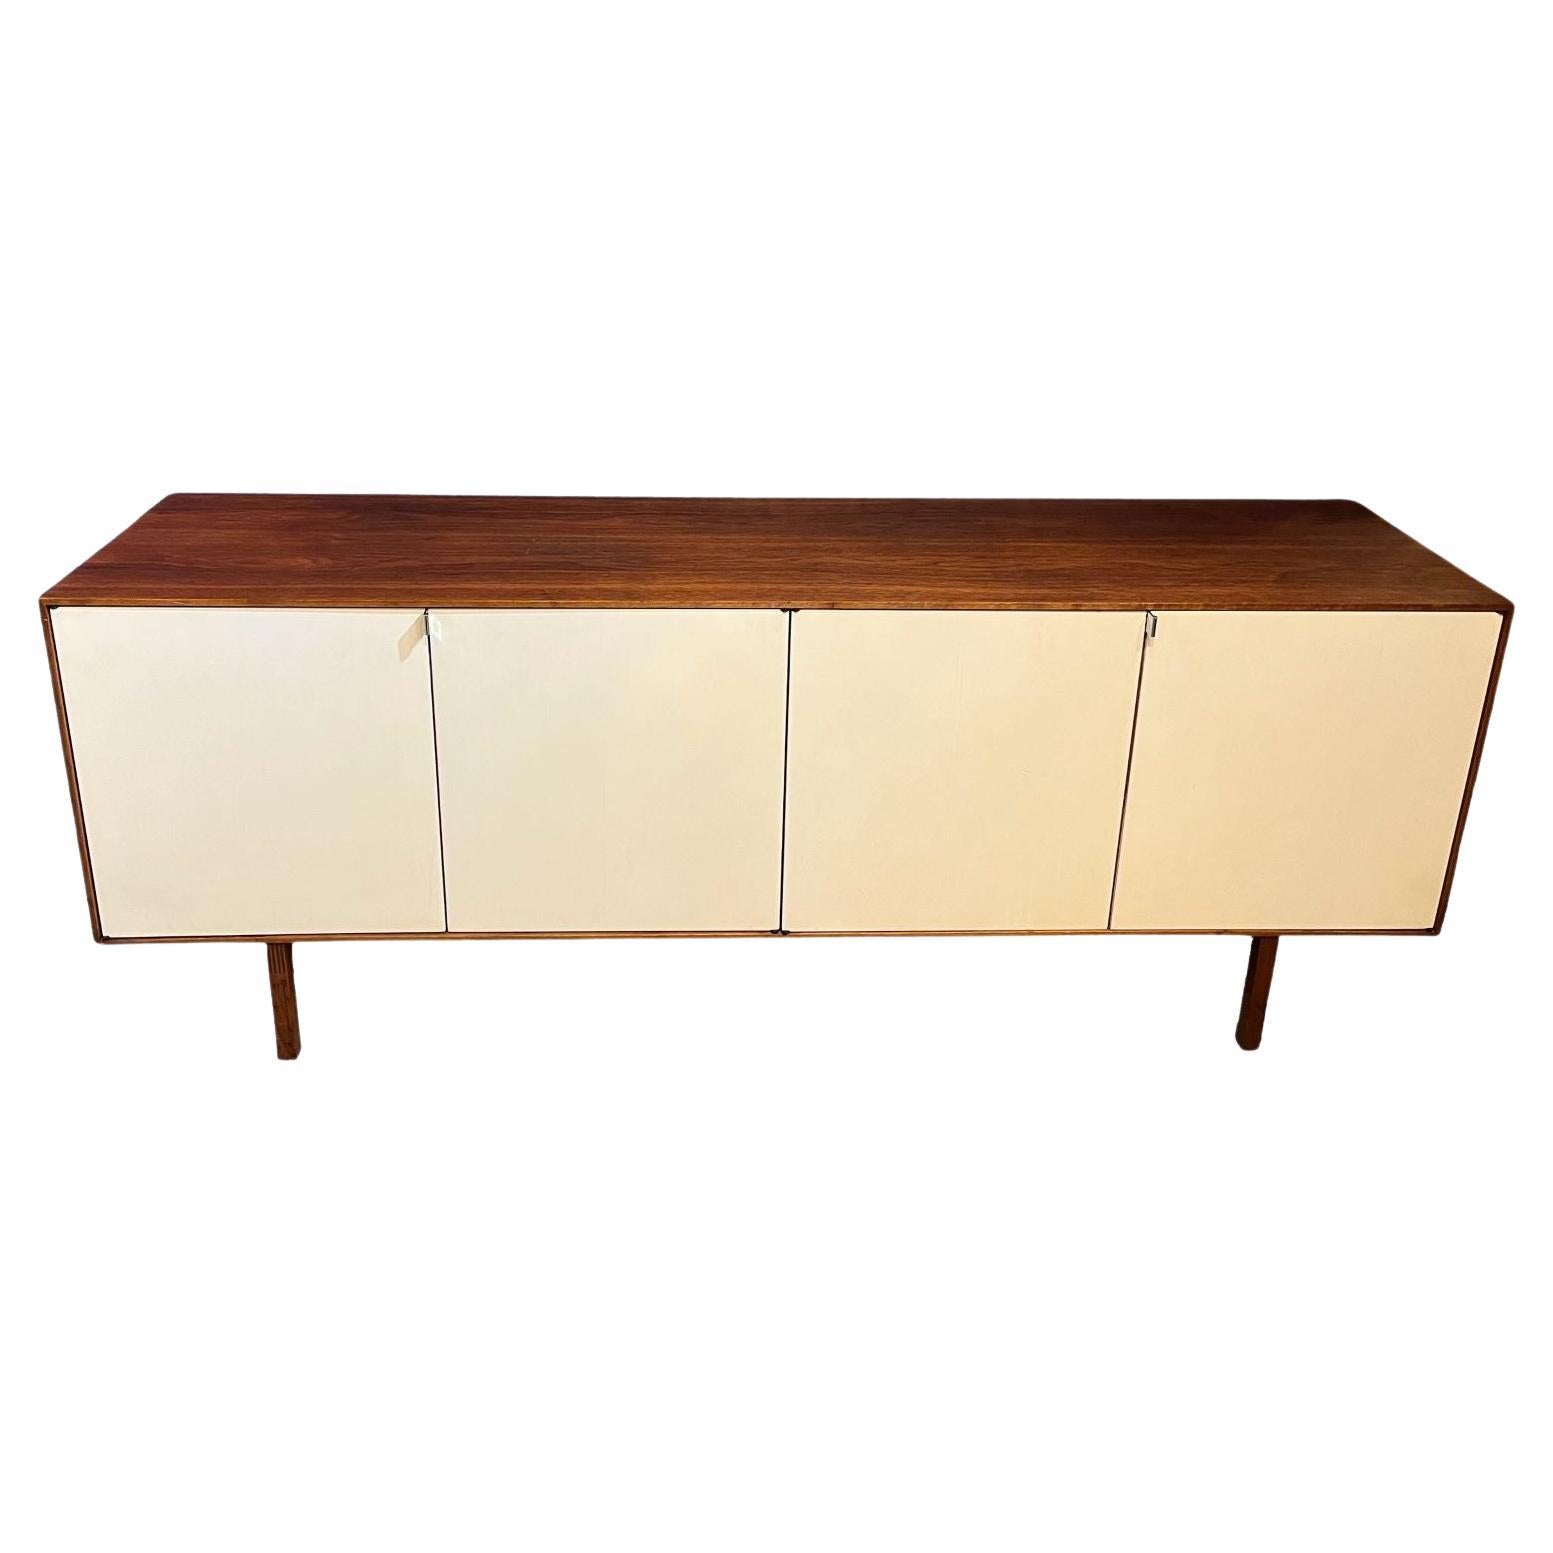 Early Florance Knoll For Knoll Associates Walnut And Cream Credenza C.1950